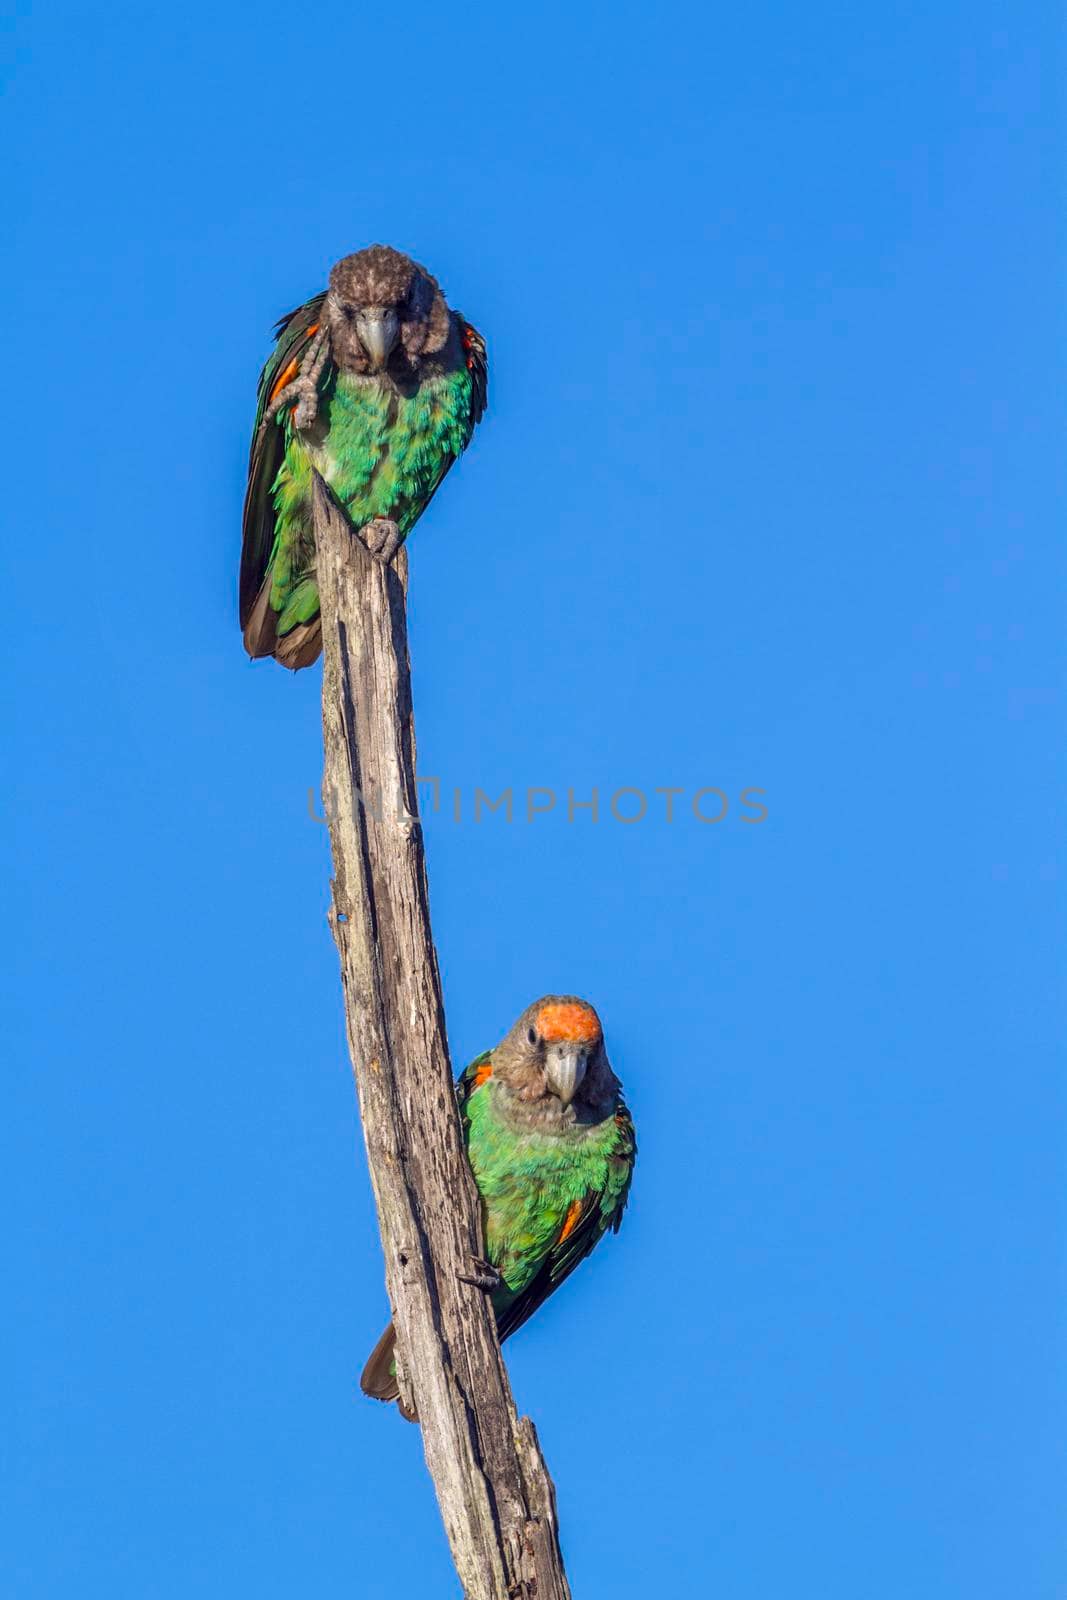 Cape Parrot in Kruger National park, South Africa ; Specie Poicephalus robustus family of Psittacidae